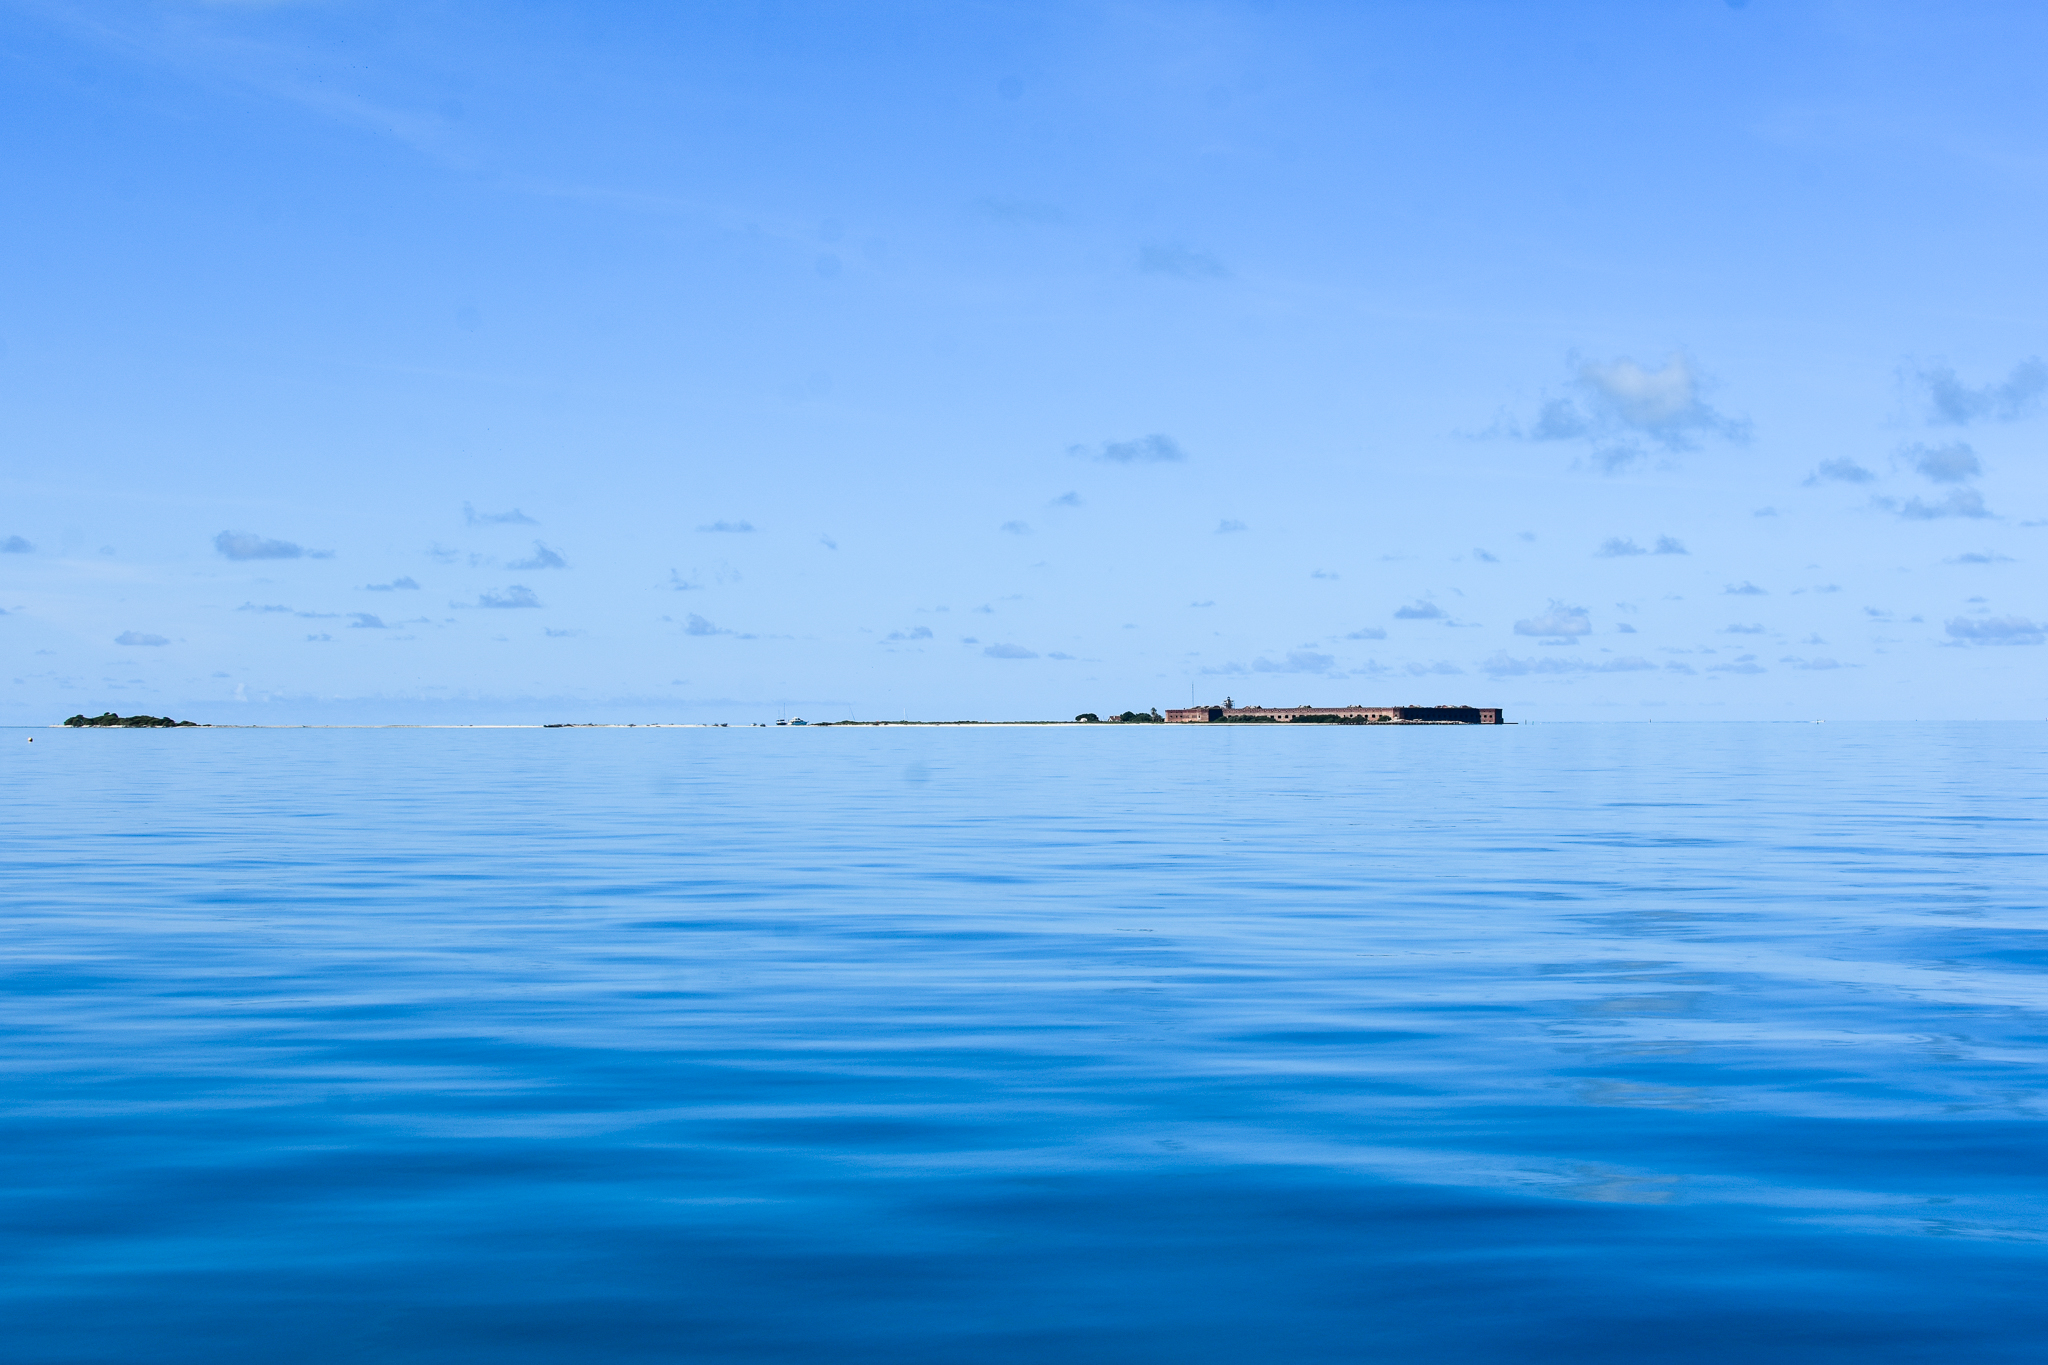 Fort Jefferson in the blue waters of the Gulf of Mexico